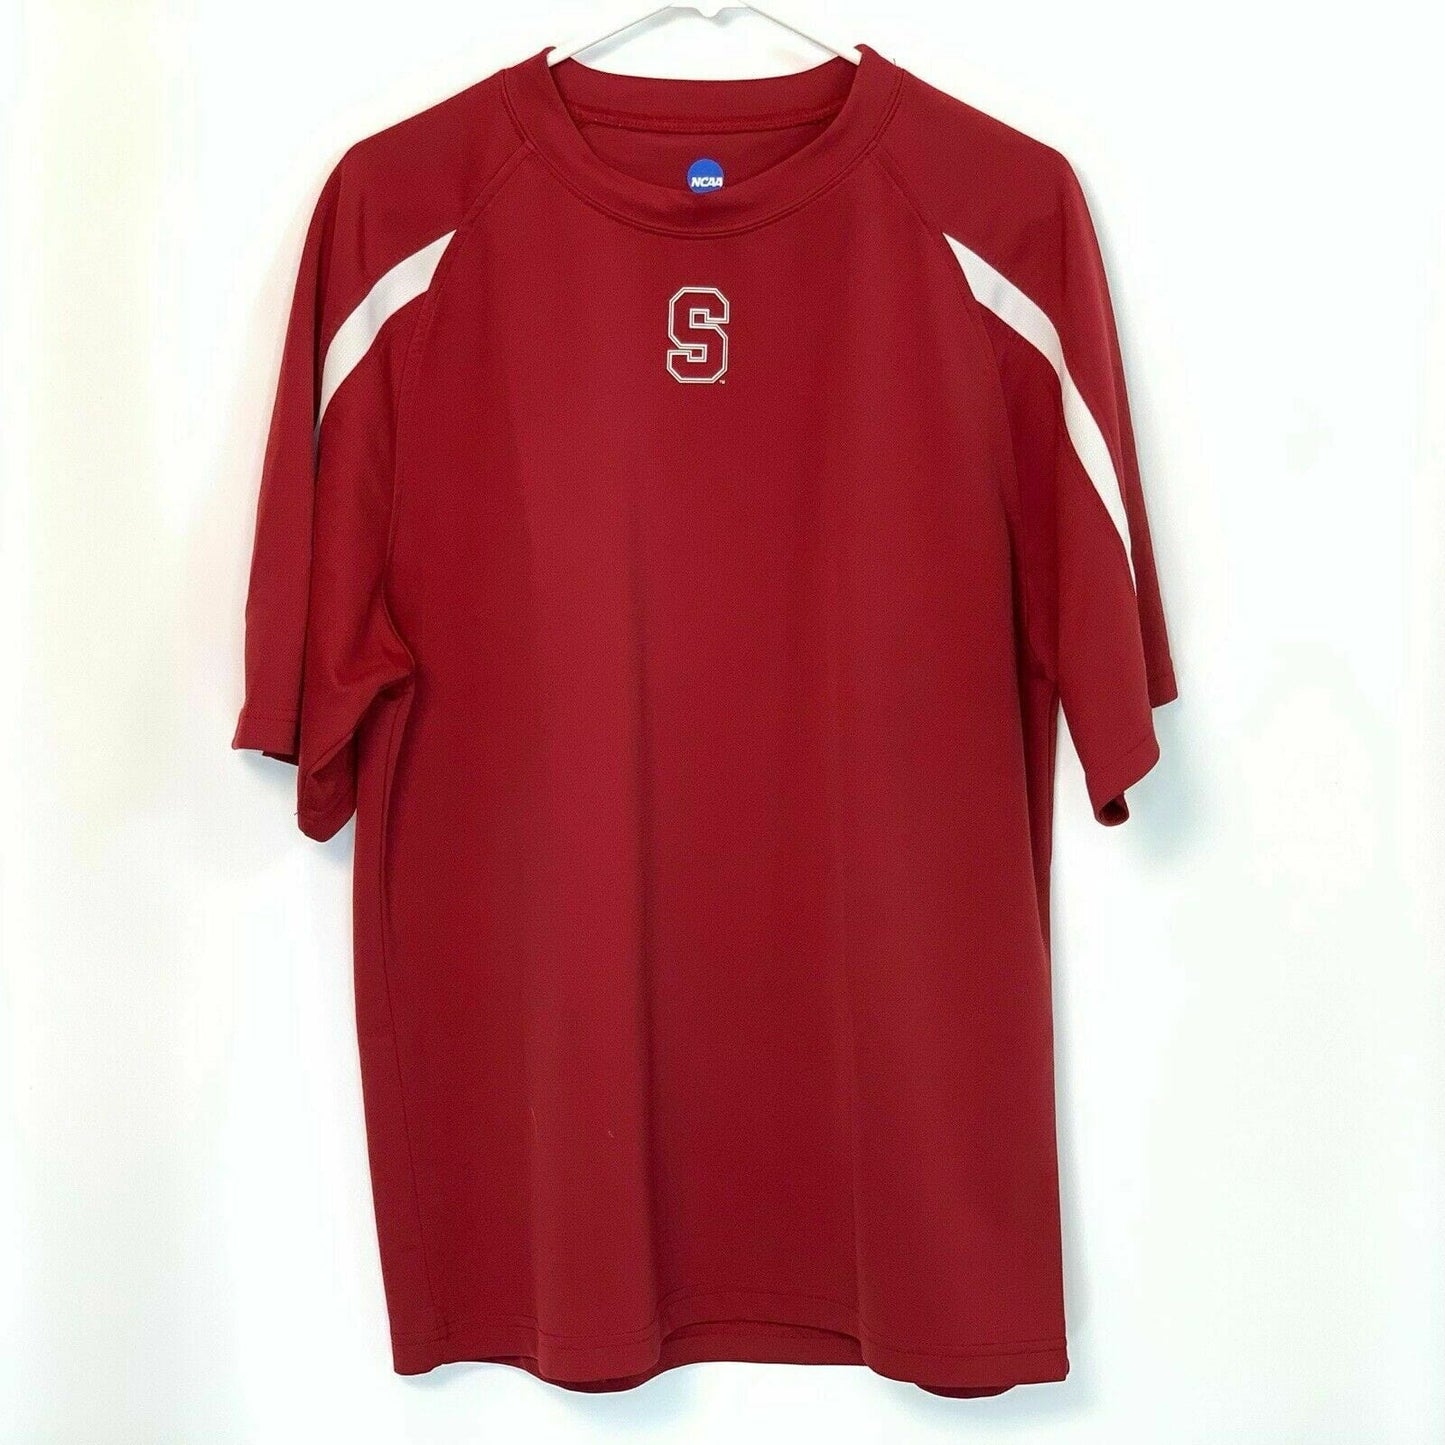 Knights Apparel Mens Stanford University T-Shirt, Cardinal Red - Size XL